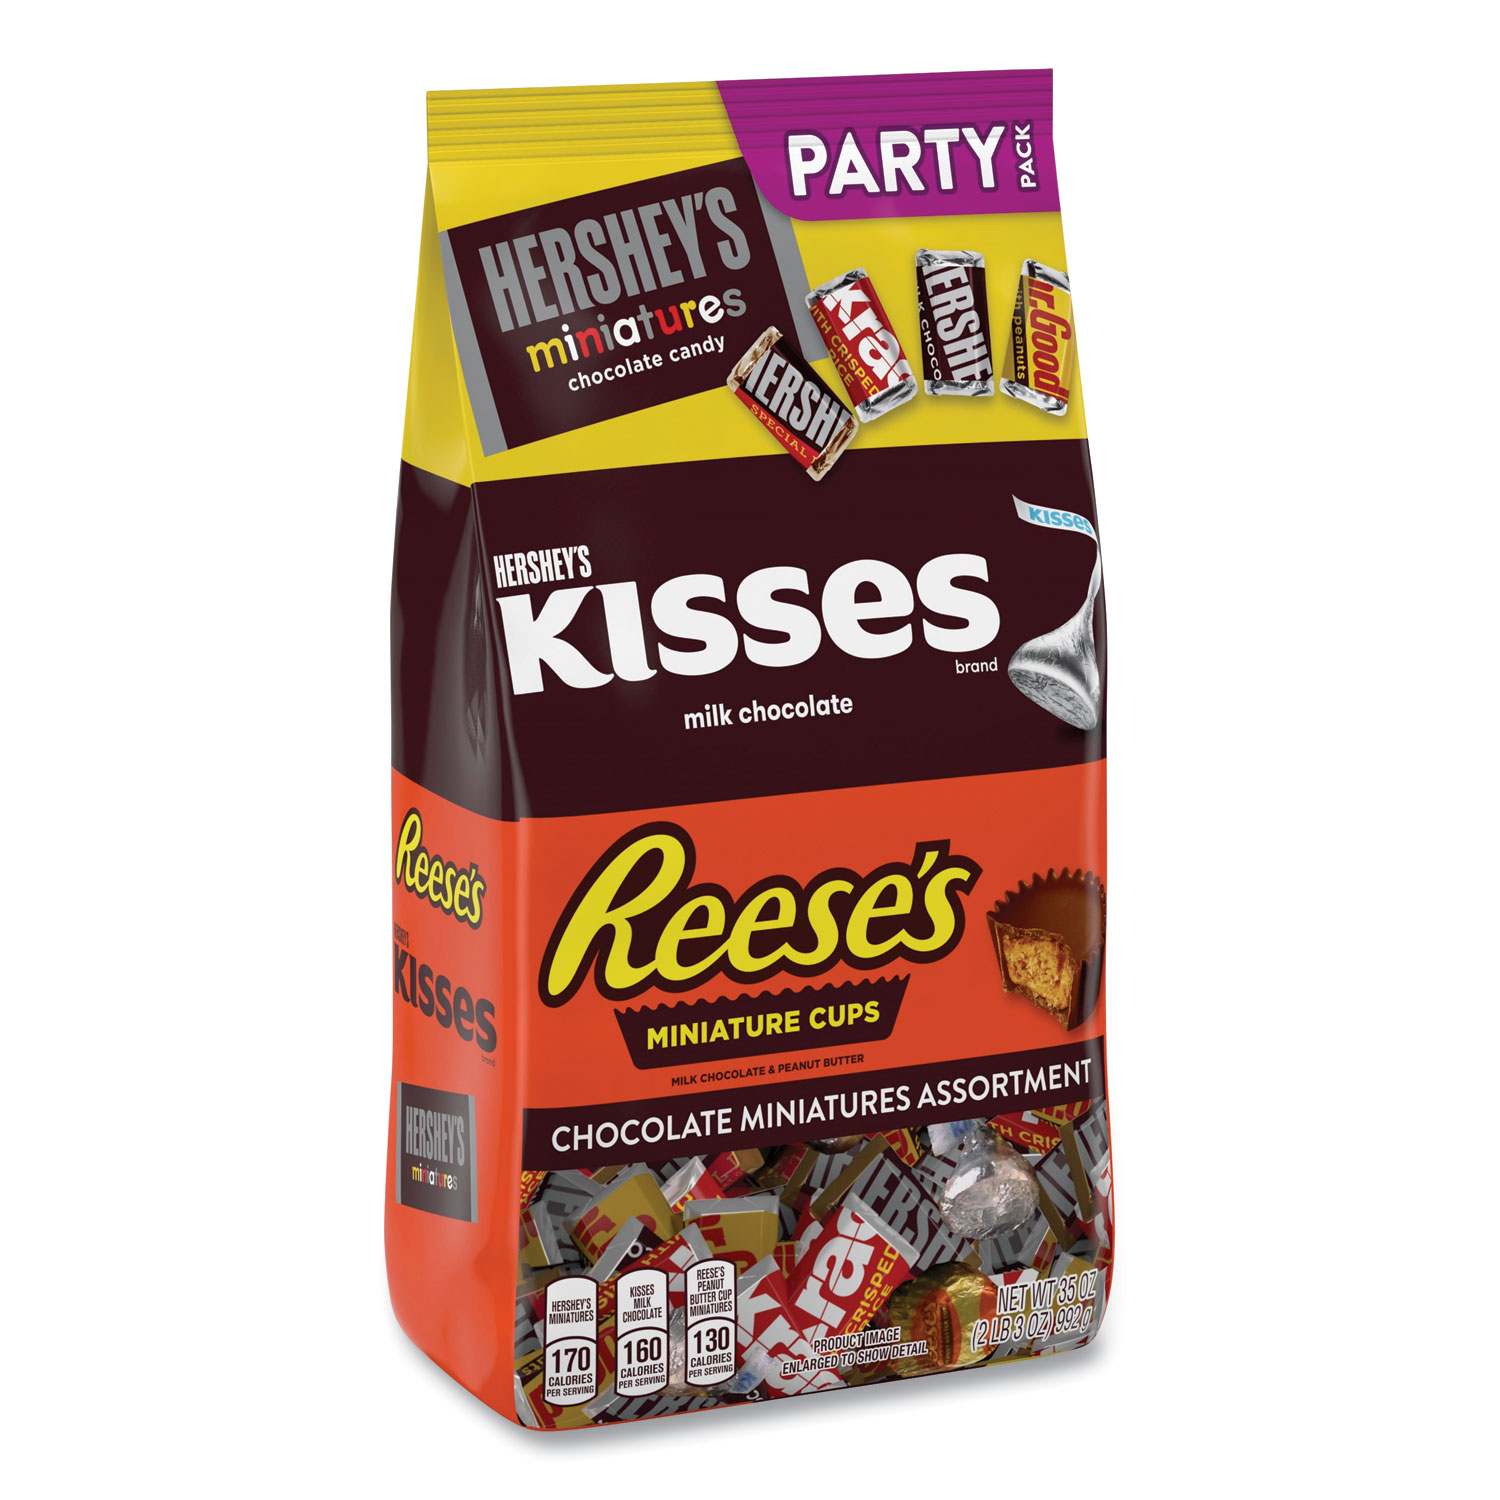  Hershey's 99982 Miniatures Variety Party Pack, Assorted Chocolates, 35 oz Bag, Free Delivery in 1-4 Business Days (GRR24600417) 